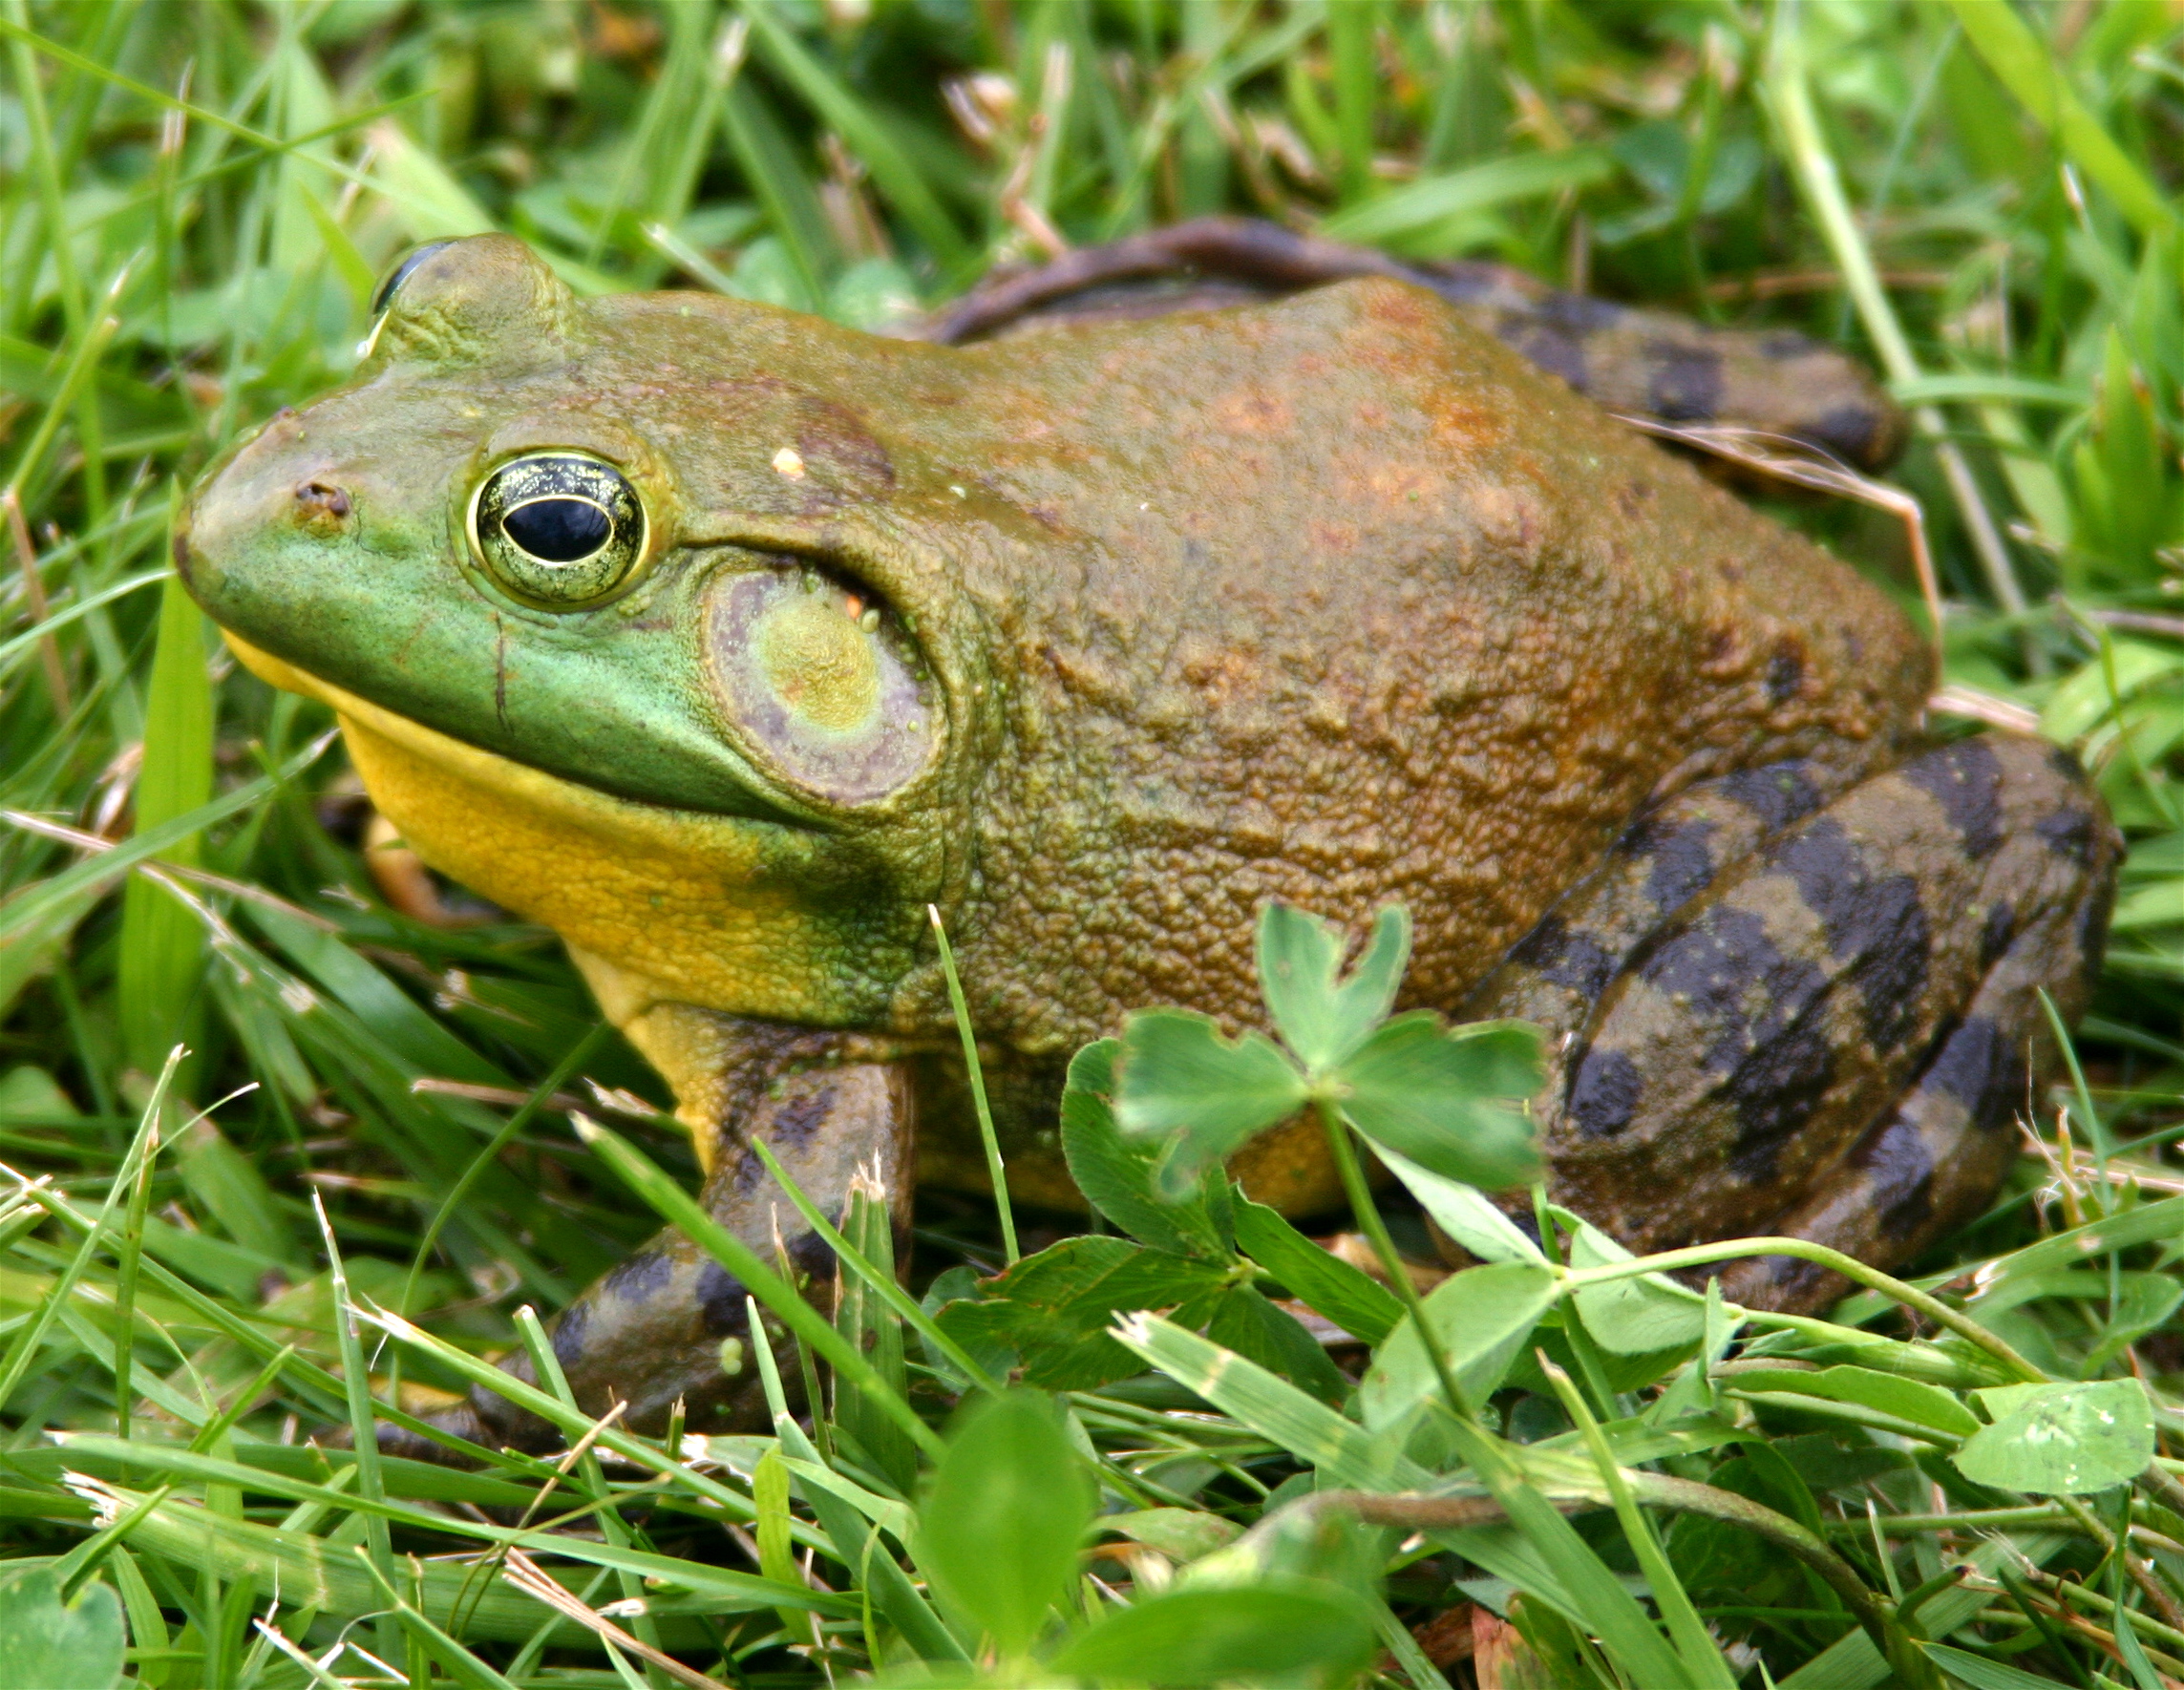 What are the habits of the American bullfrogs?